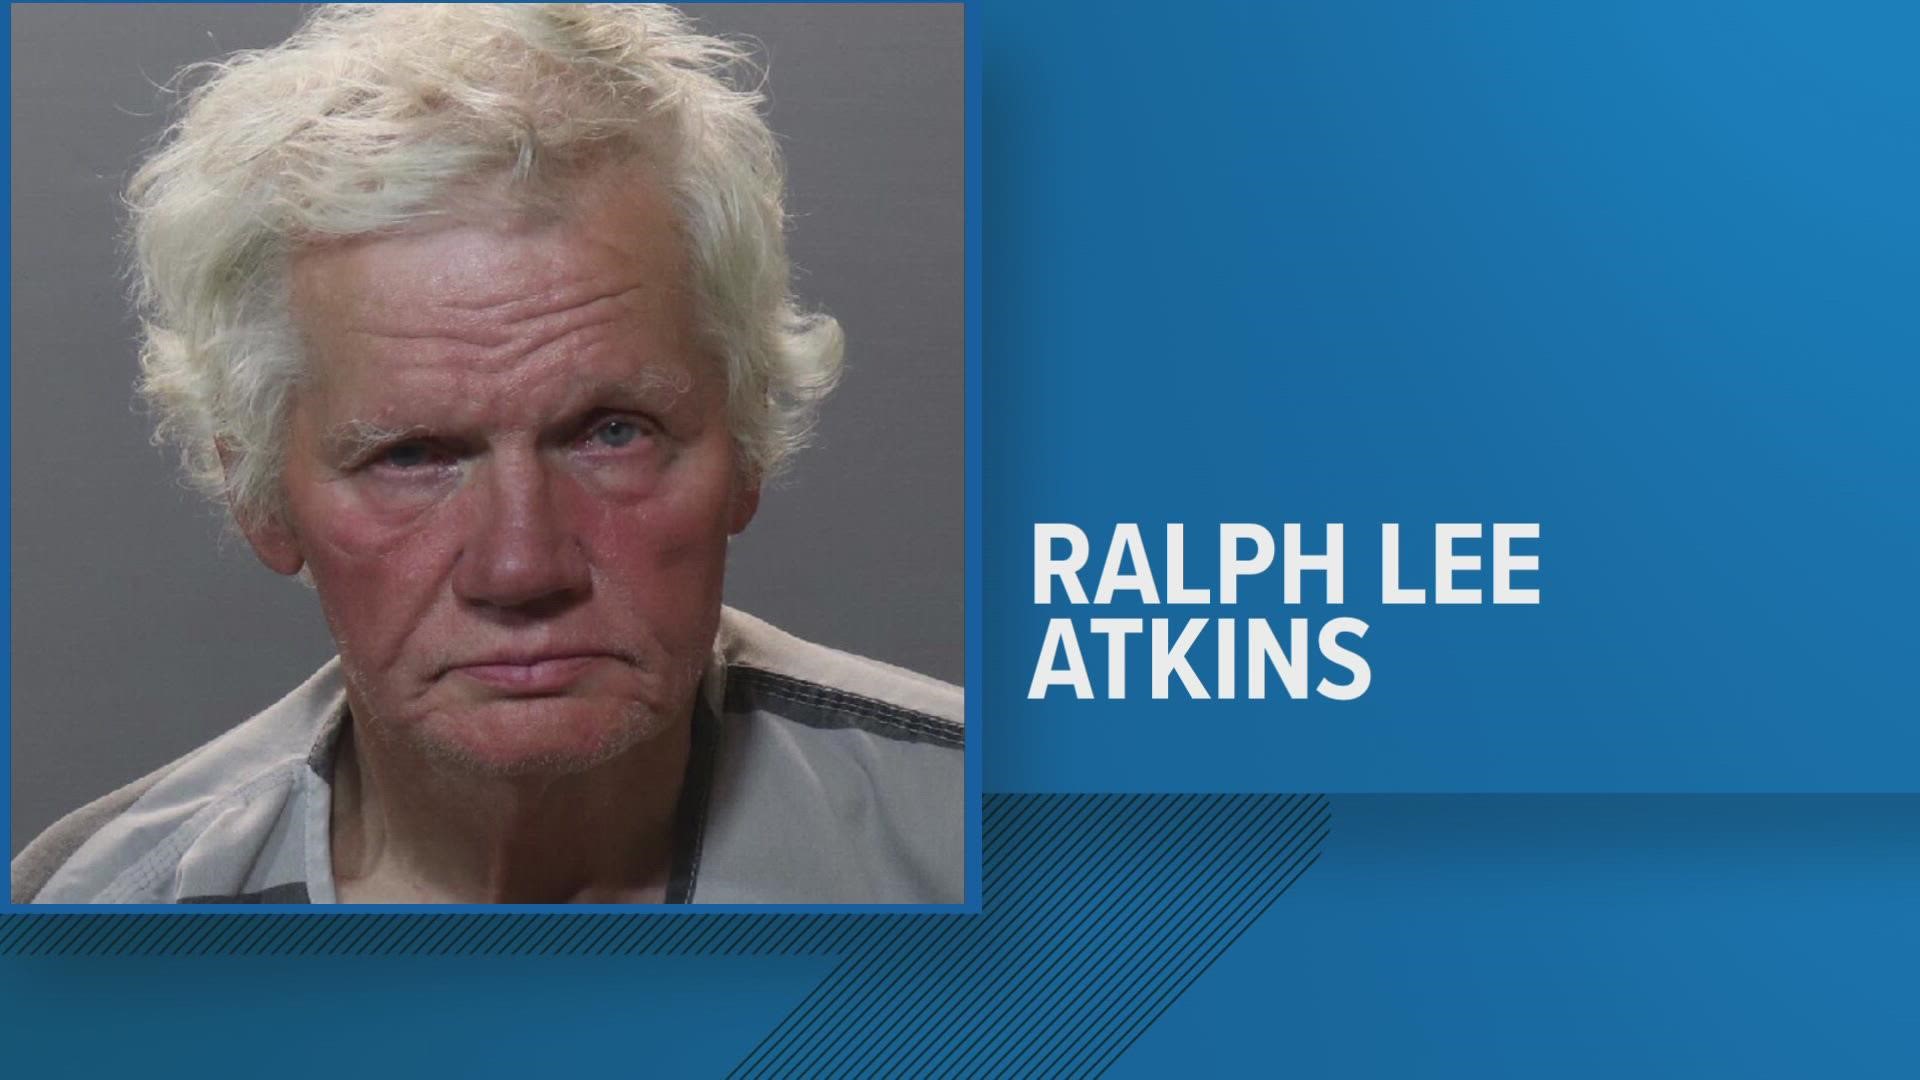 Ralph Lee Atkins is being held on a $500,000 bond.